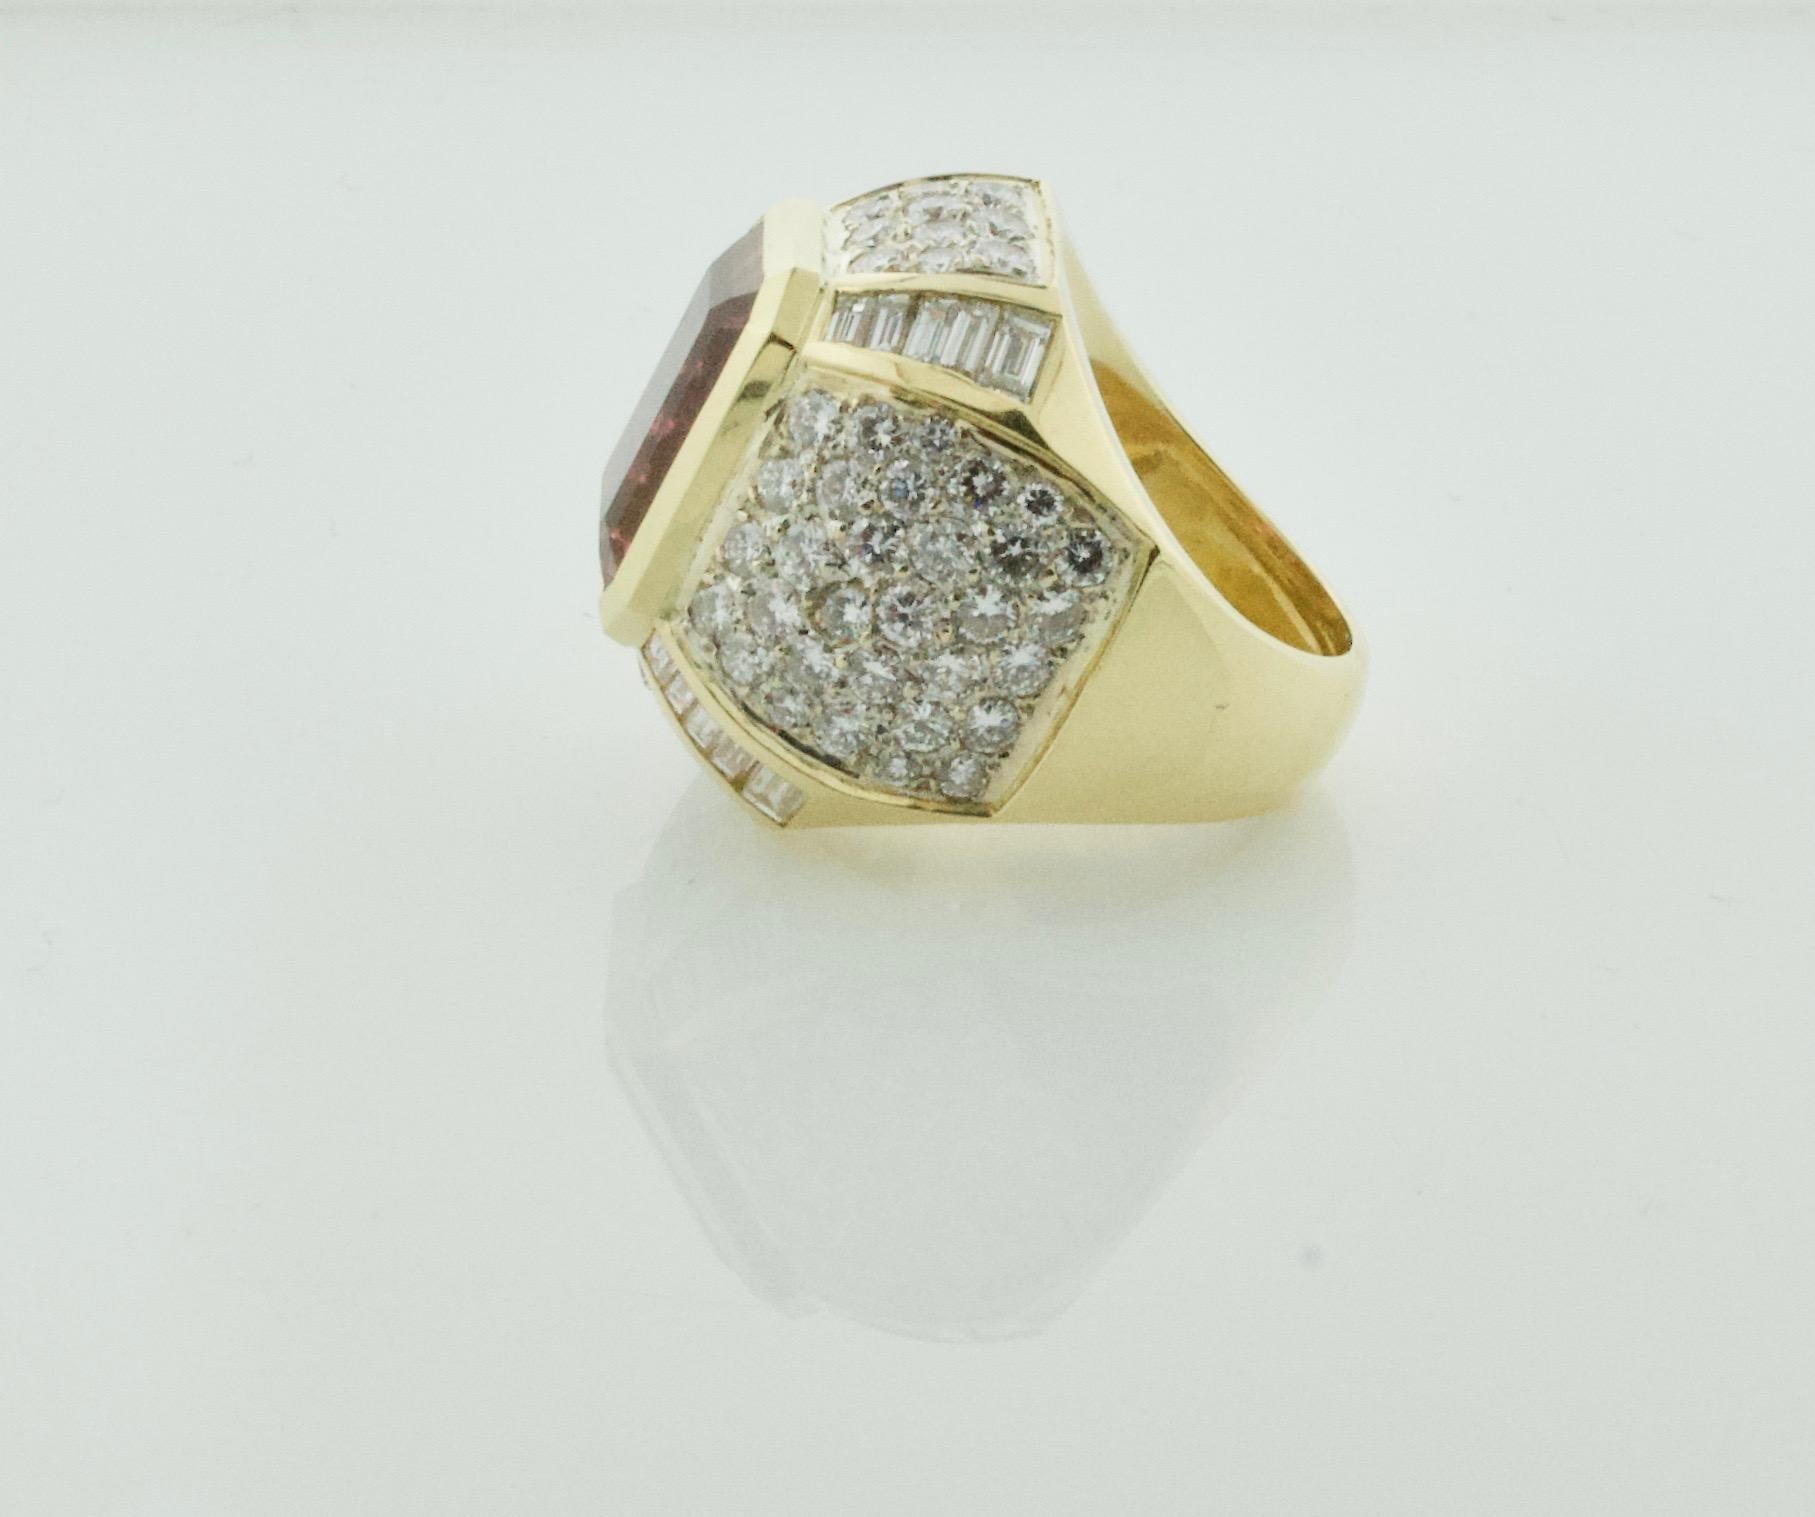 Huge Diamond and Pink Tourmaline Ring in 18k In Excellent Condition For Sale In Wailea, HI